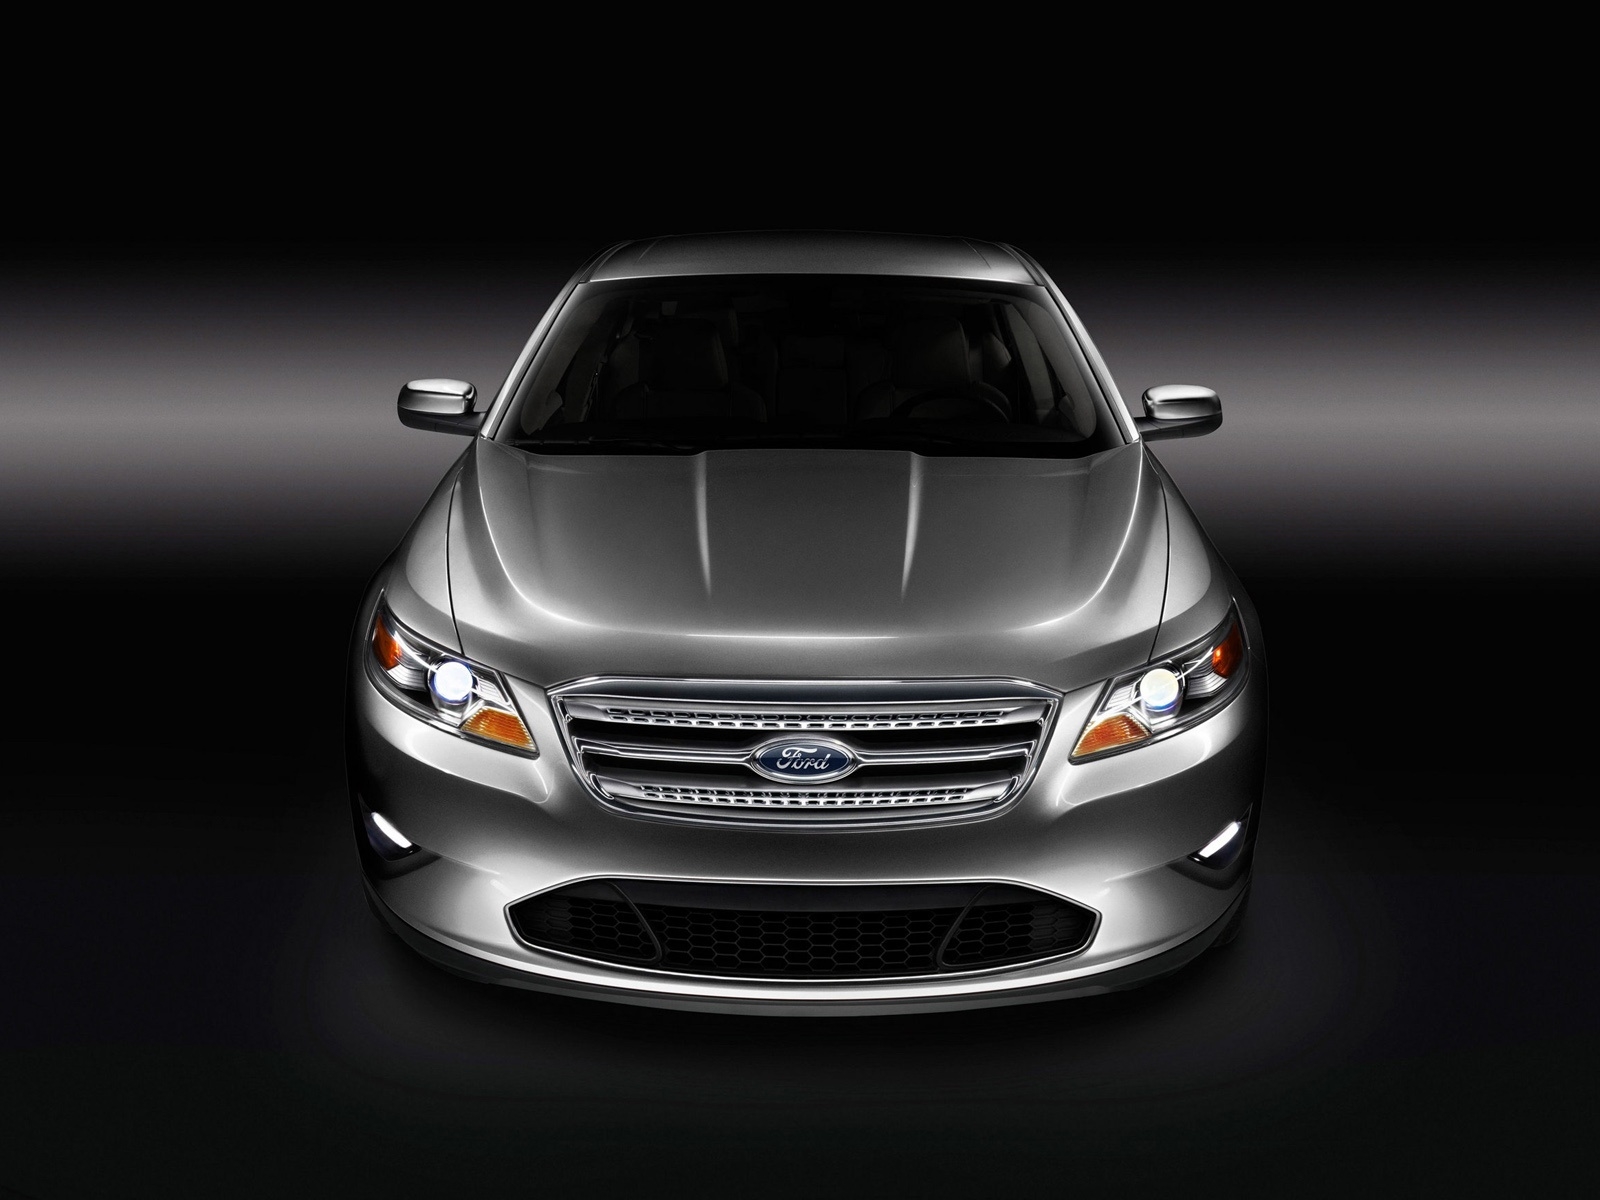 Ford Taurus 2010 for 1600 x 1200 resolution